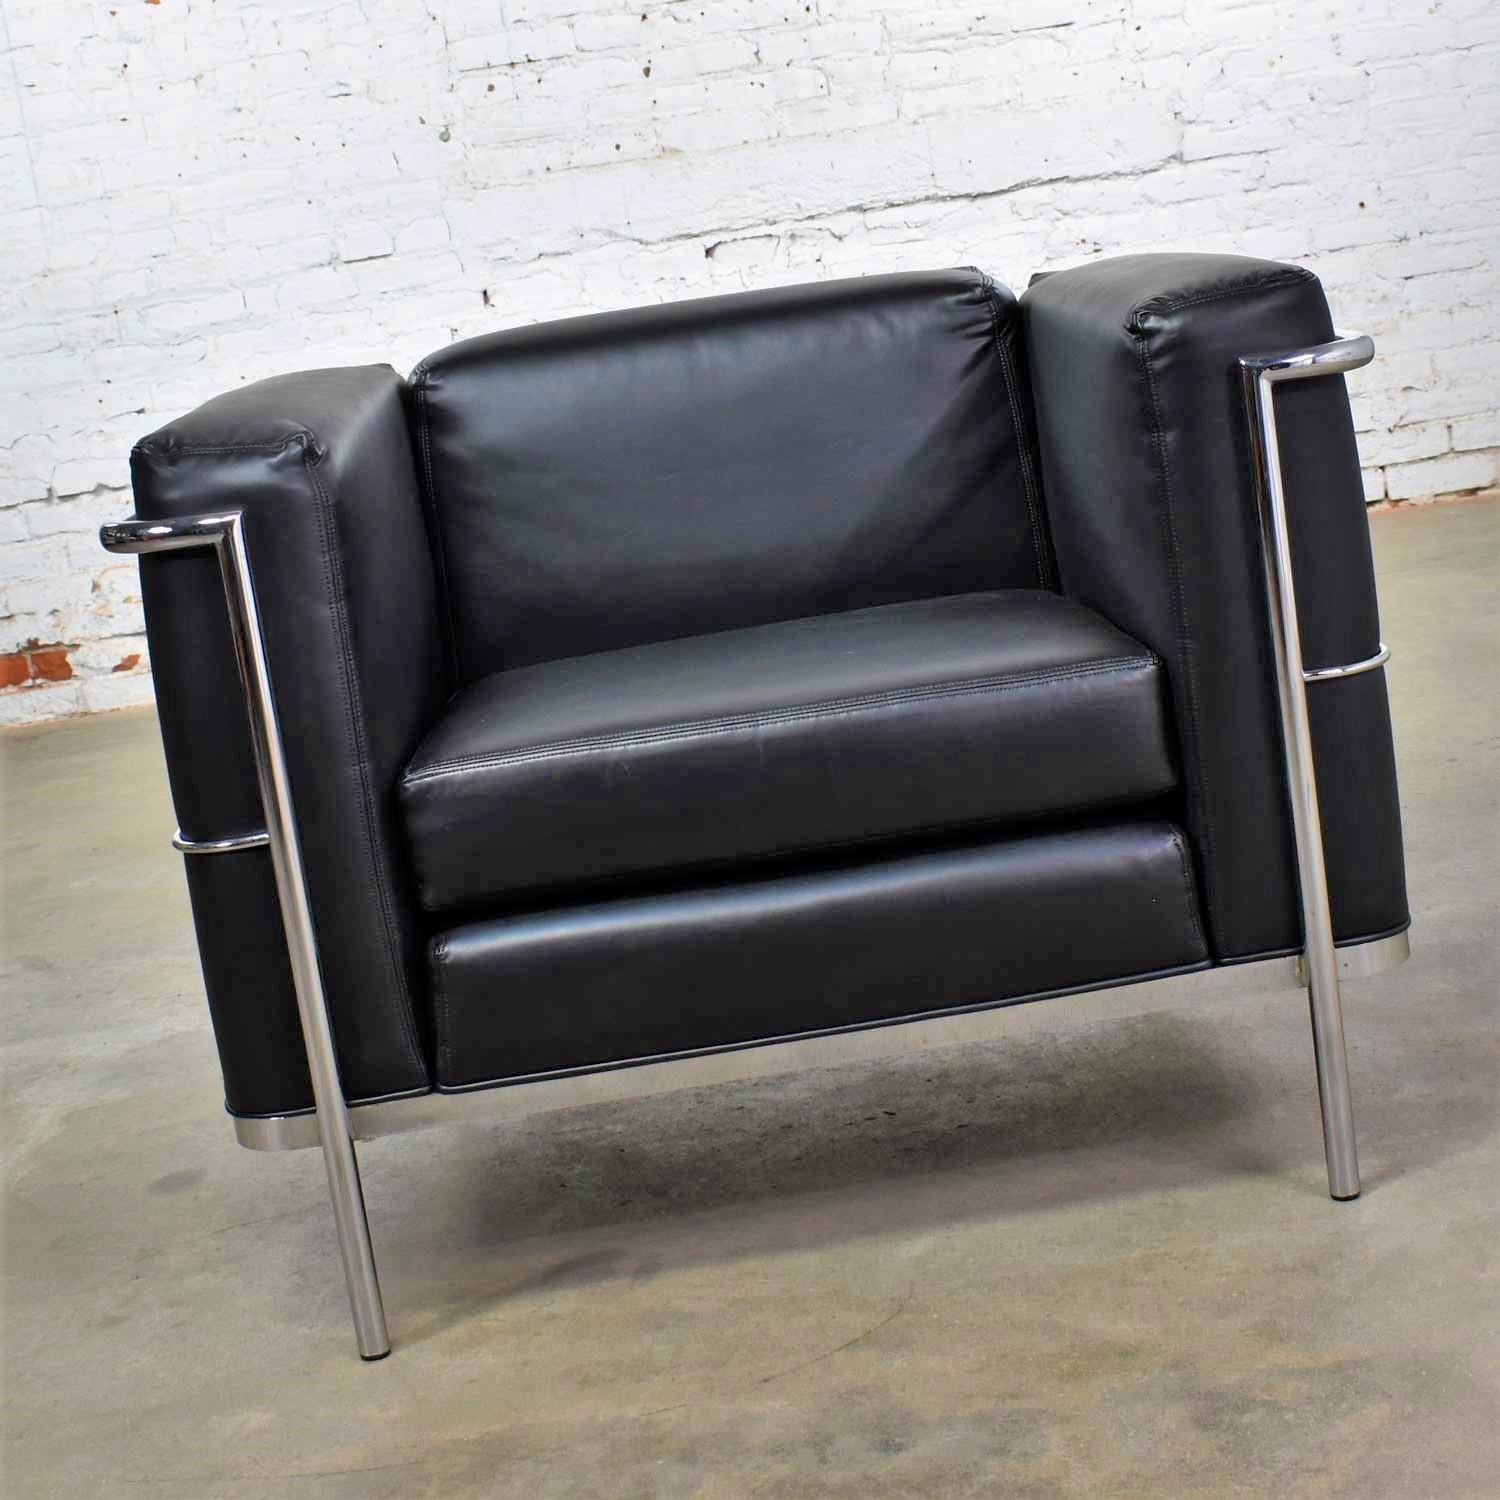 Handsome 20/123 black faux leather cube club chair by Jack Cartwright after Le Corbusier’s LC2 chair. This chair is in wonderful vintage condition. We have re-colored the faux leather to make it look brand new. The chrome may have some small